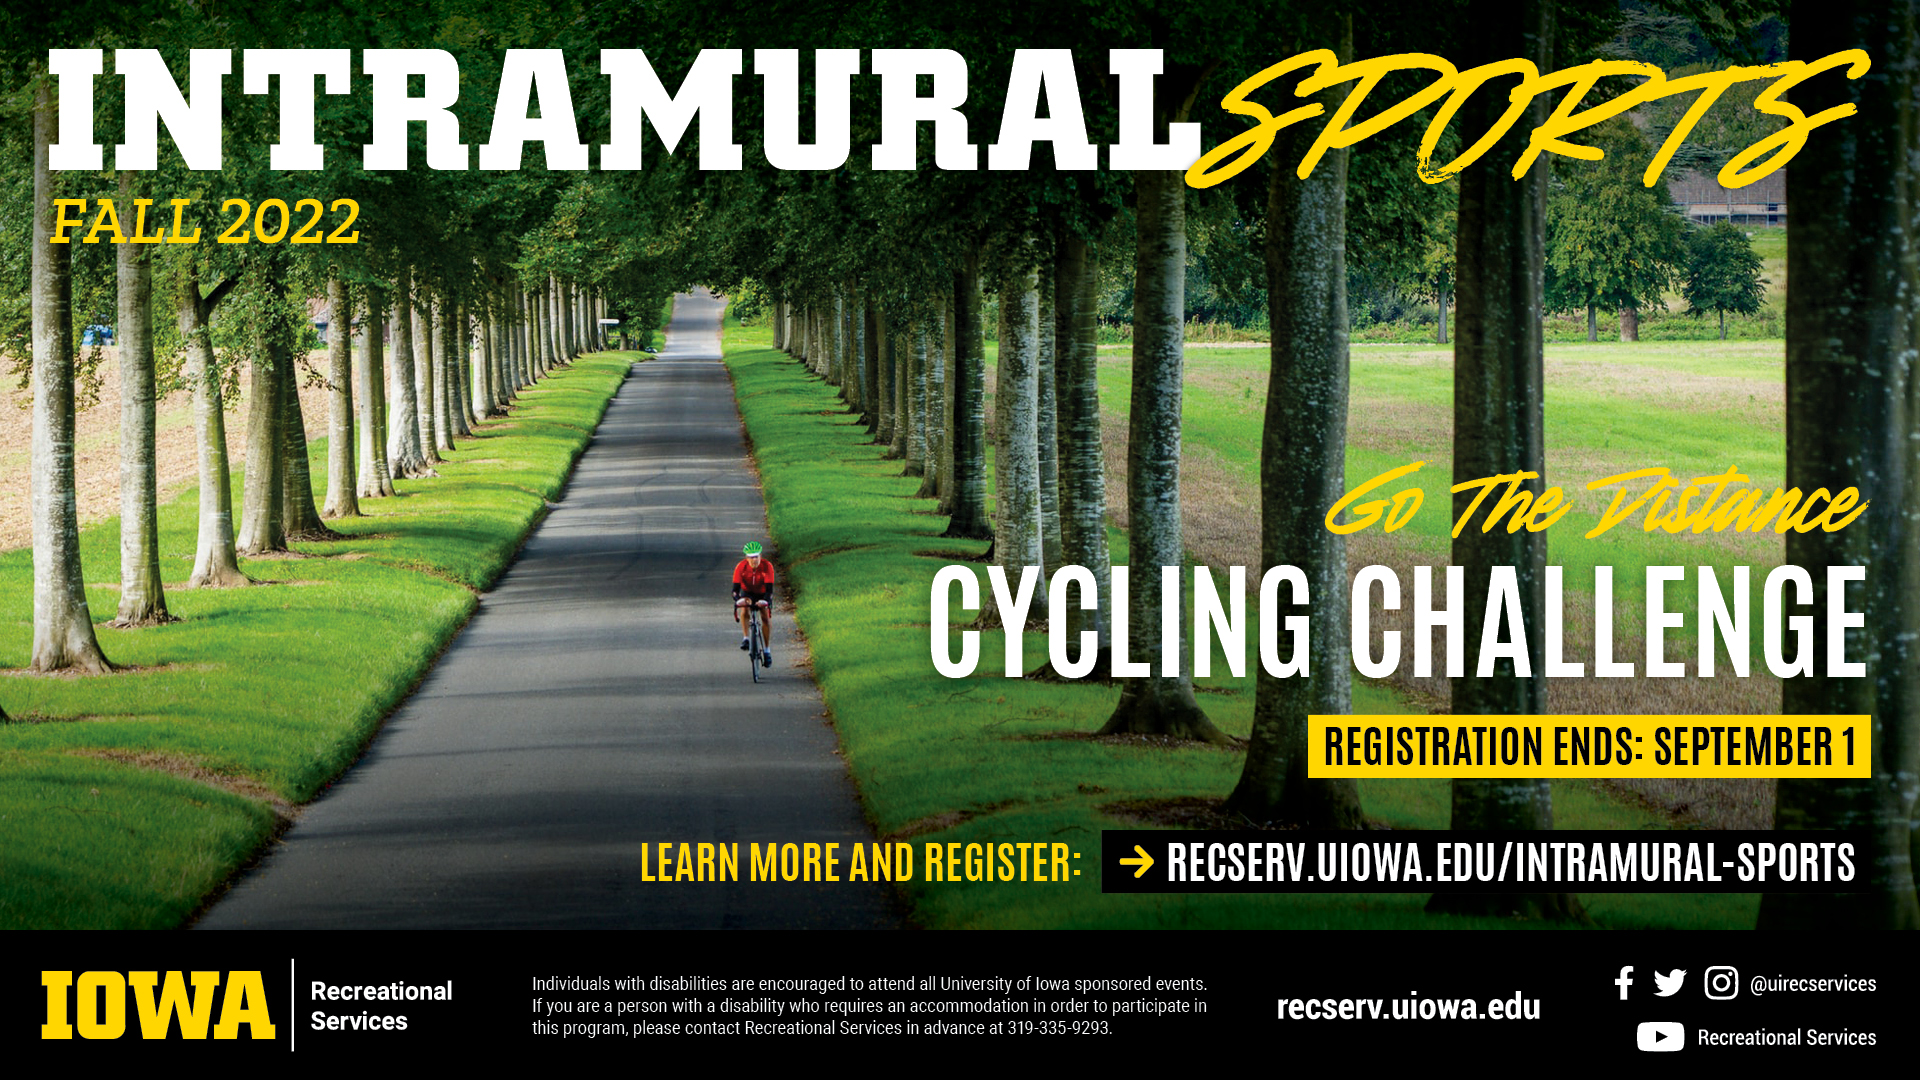 Intramural Sports Fall 2022: Go the Distance Cycling. Learn more and register at reserv.uiowa.edu/intramural-sports